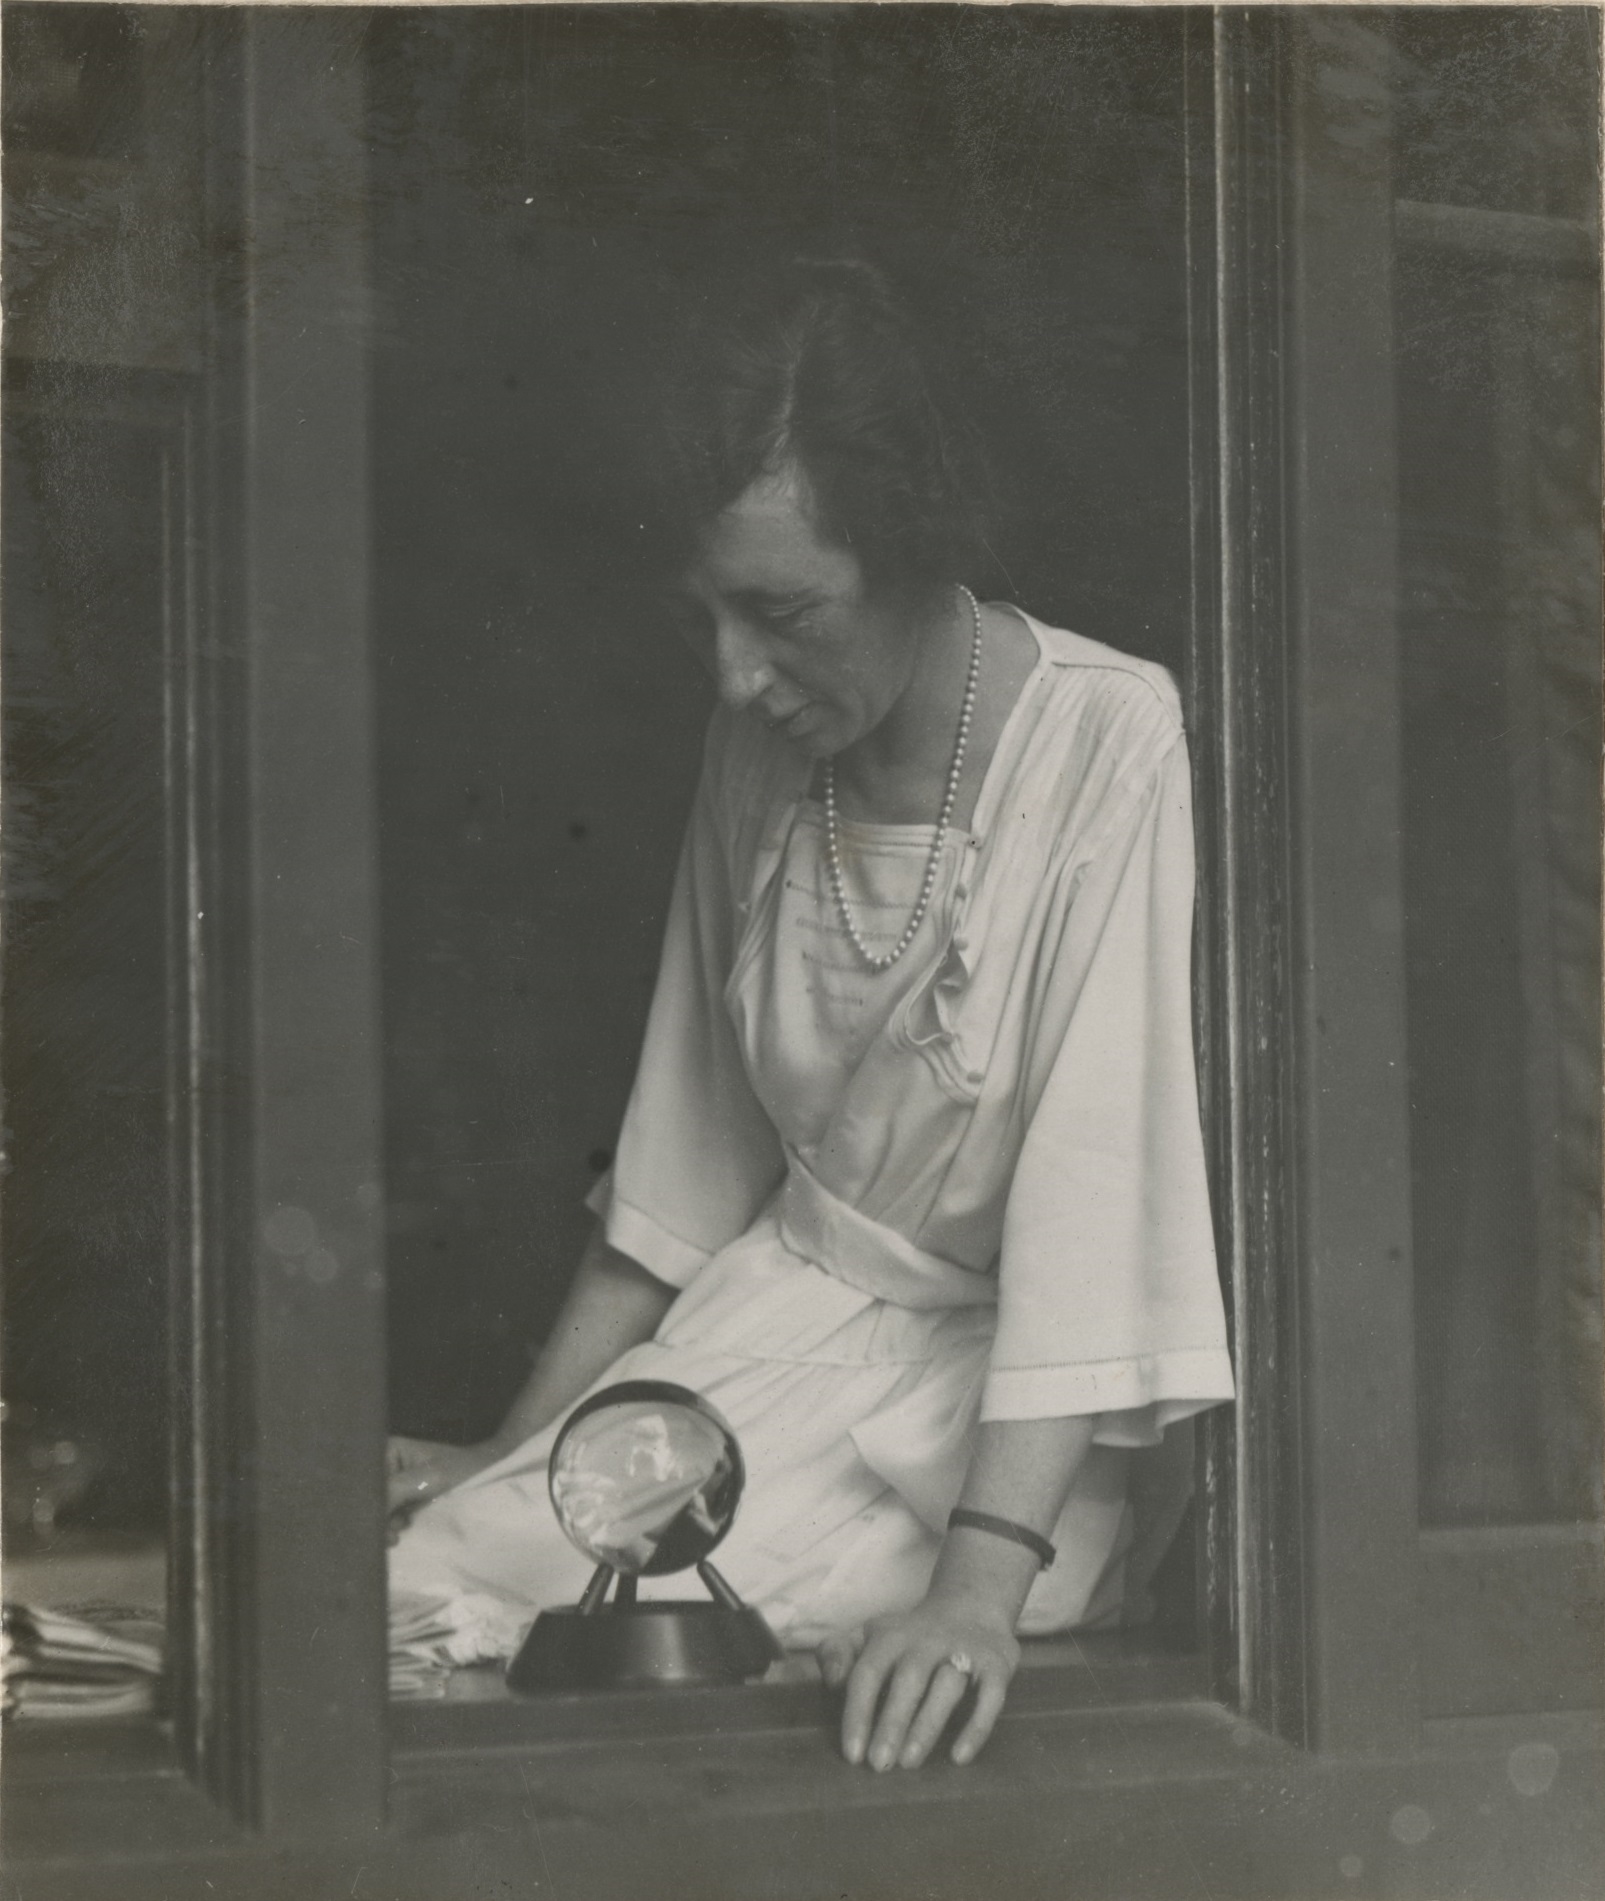 Woman dressed in white dress and pearl necklace  sitting on window ledge looking down at a clear glass ball on a stand